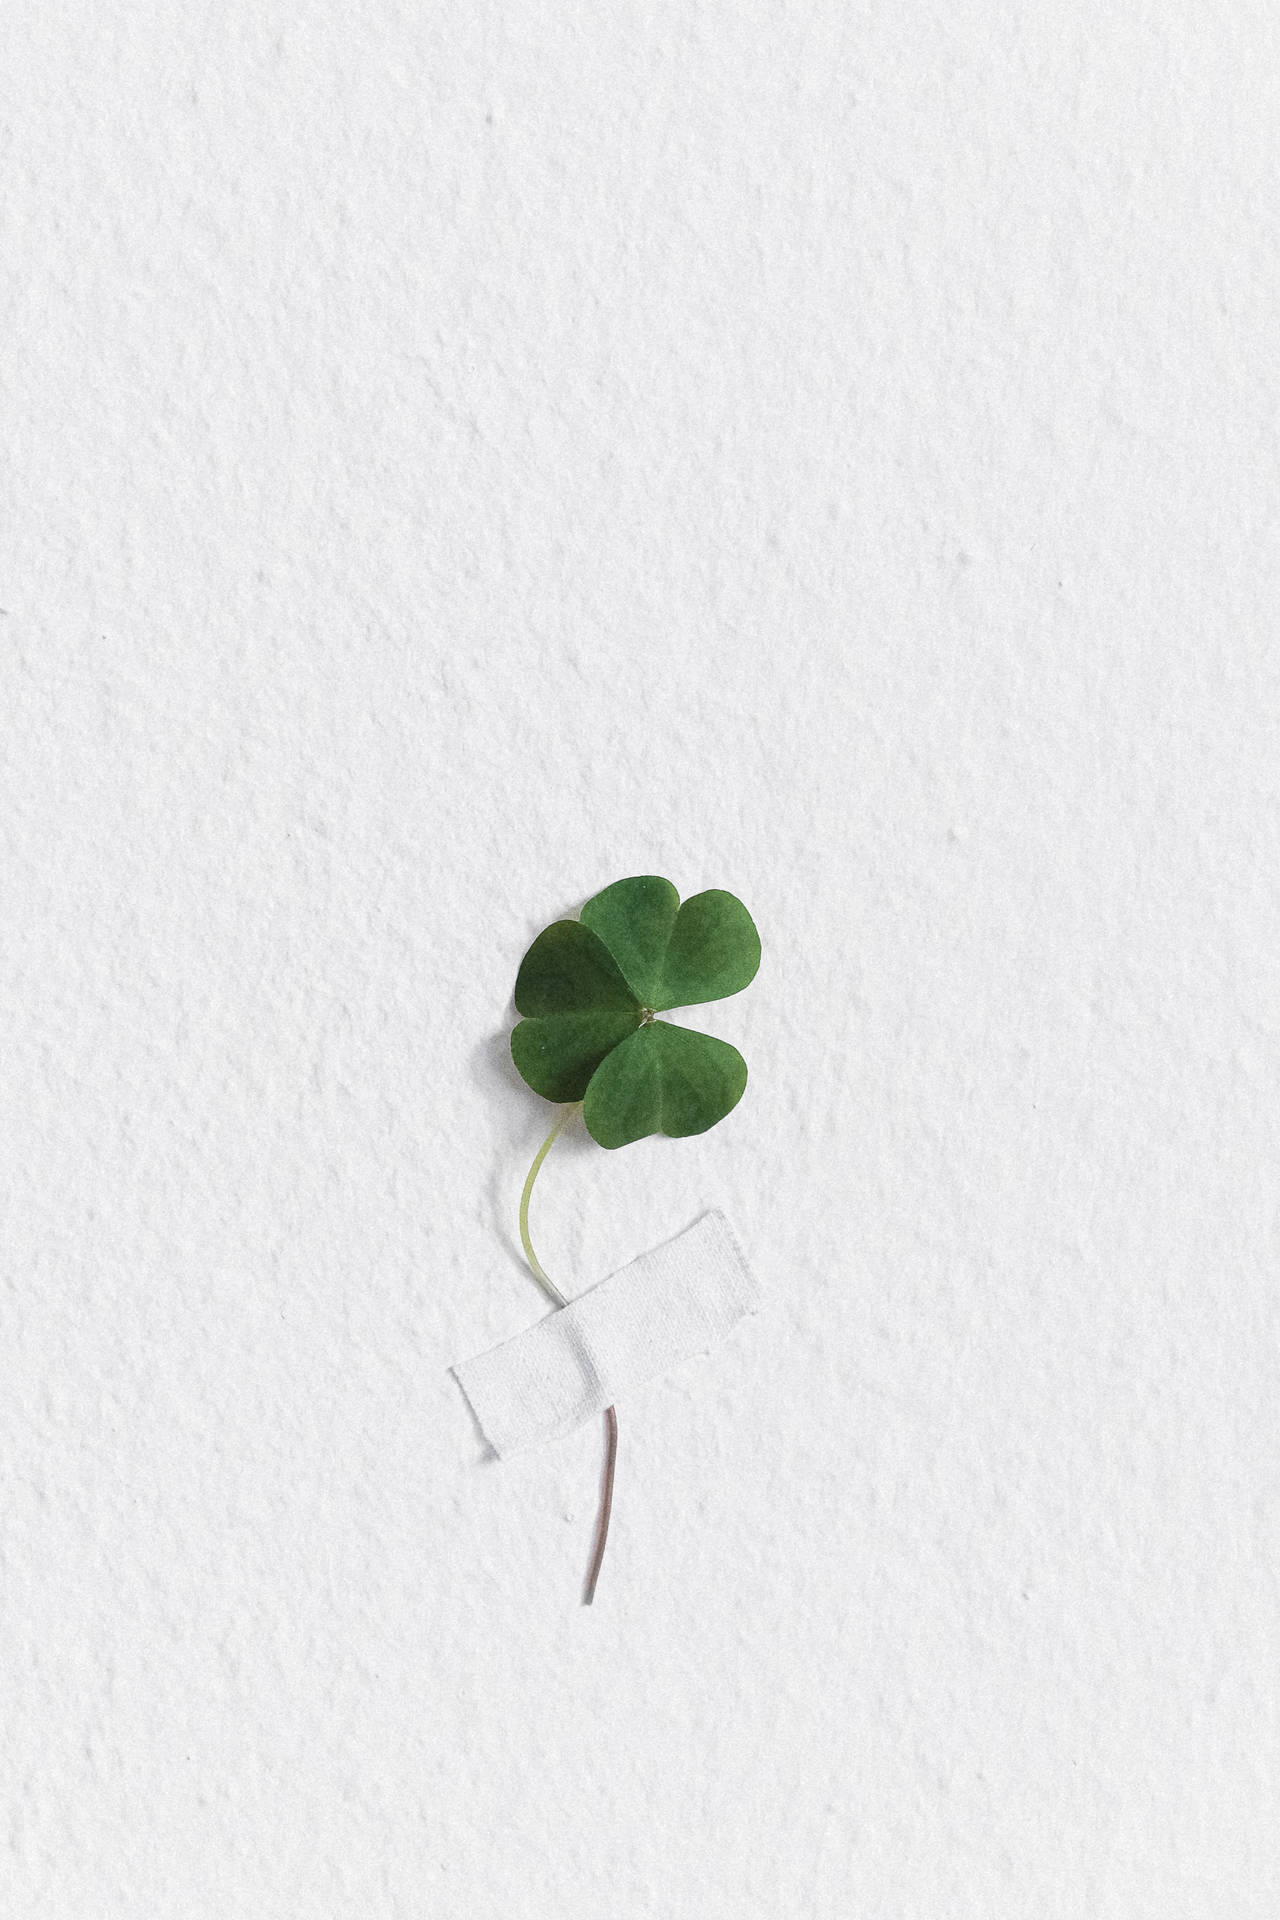 Small Clover On White Background Background